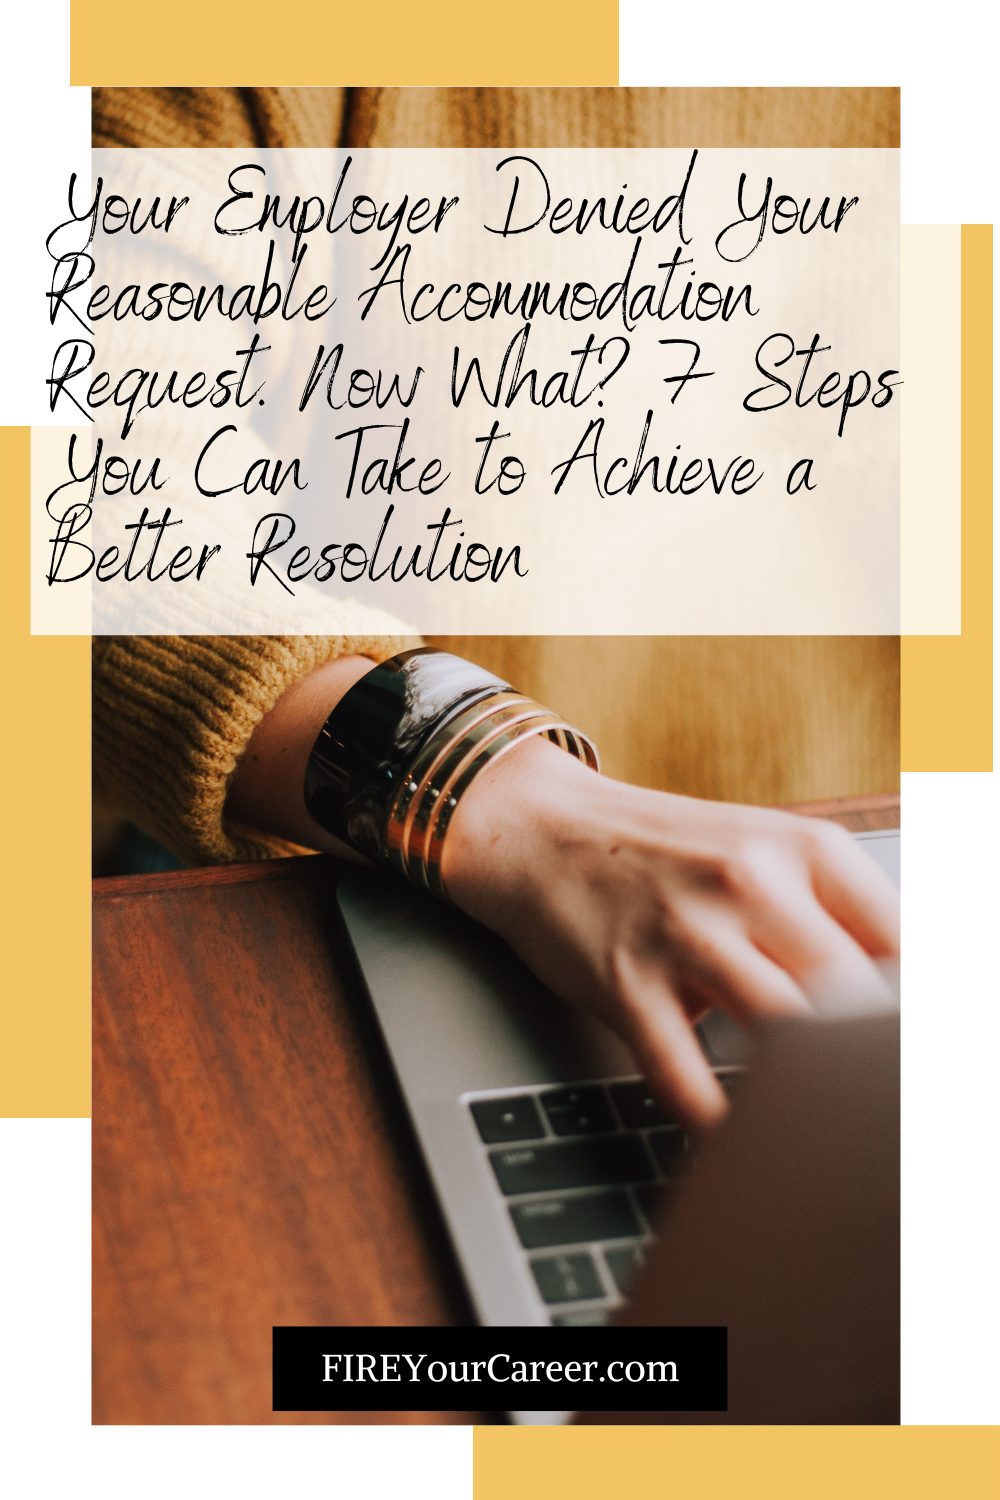 Your Employer Denied Your Reasonable Accommodation Request. Now What 7 Steps You Can Take to Achieve a Better Resolution Pinterest